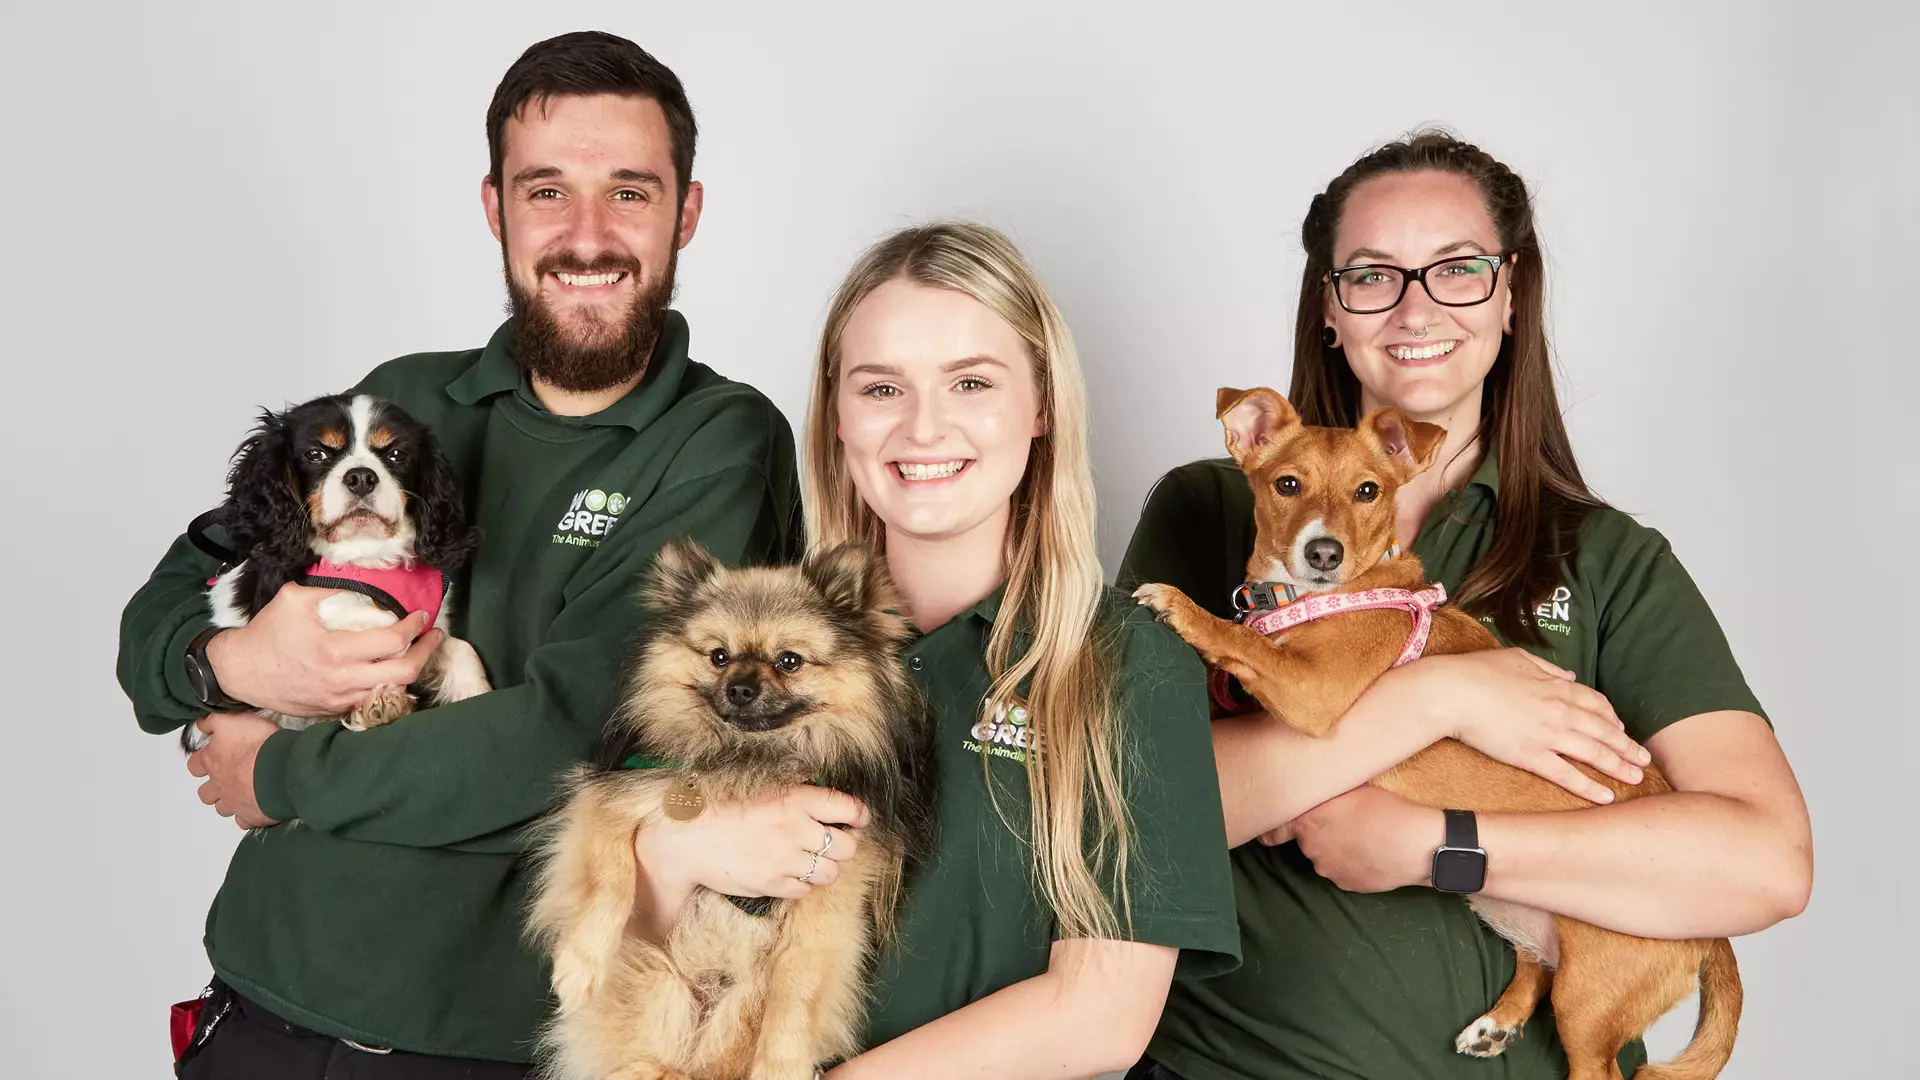 The centre helps hundreds of dogs (